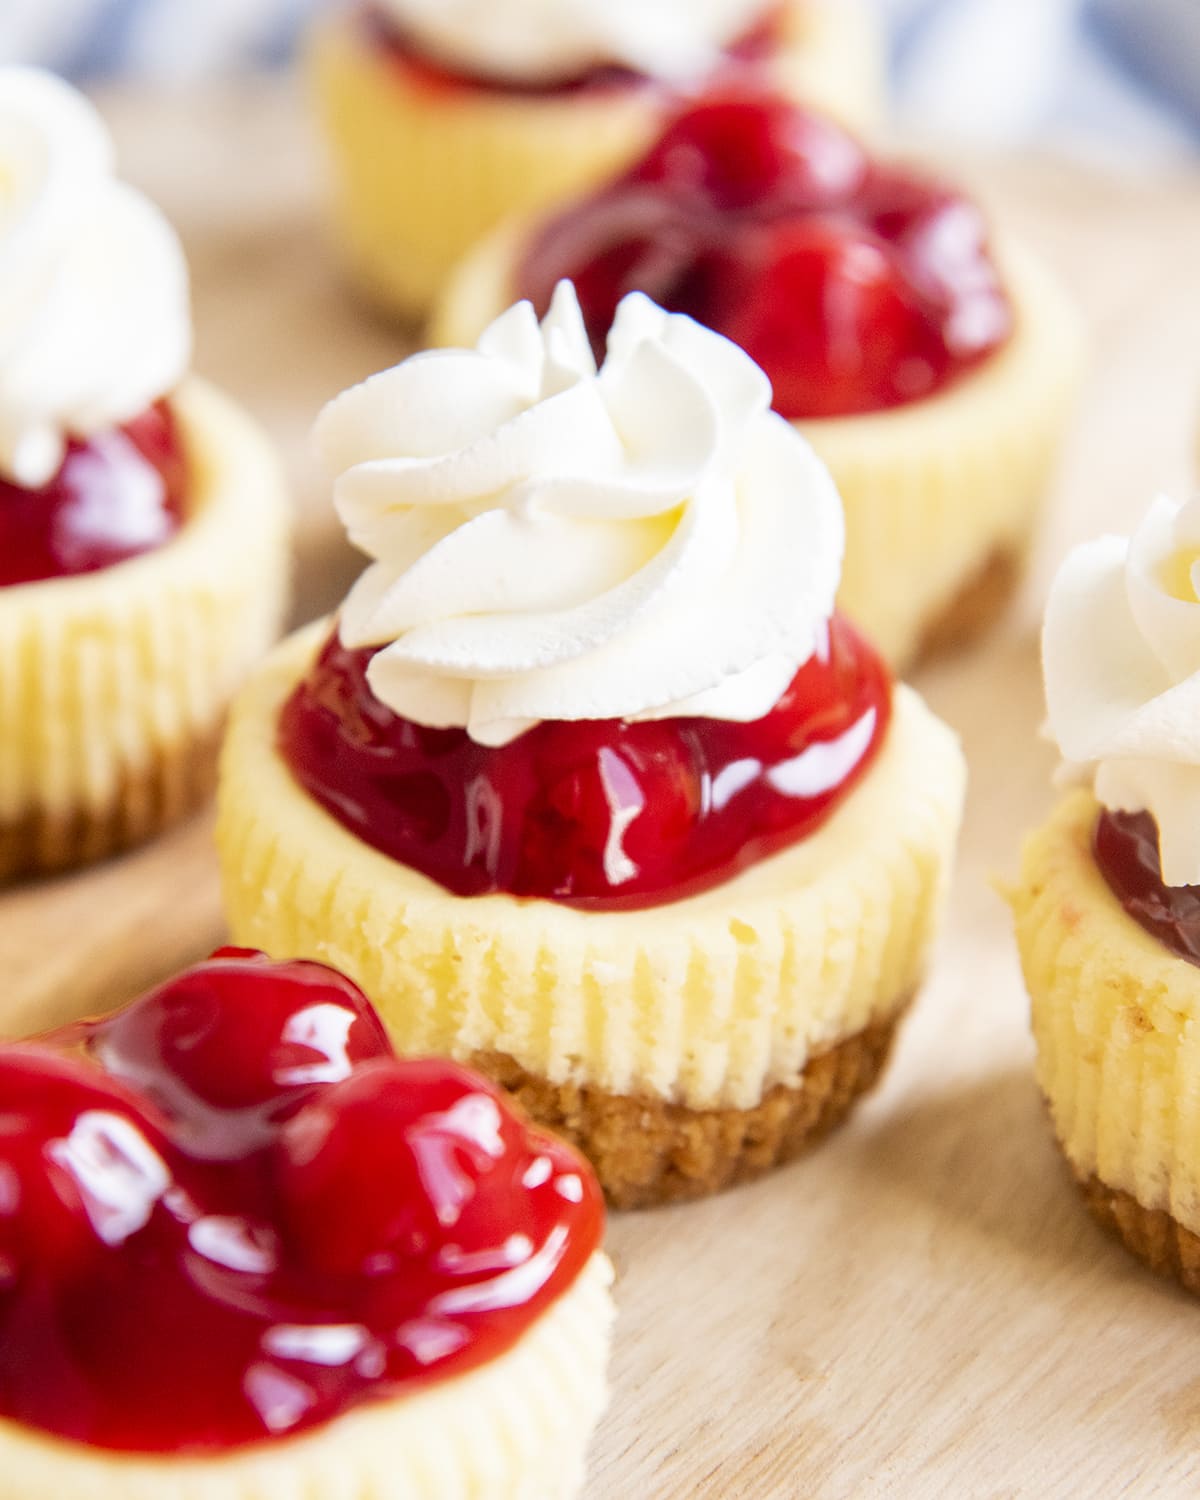 Mini cherry cheesecakes topped with red cherry pie filling on a wooden plate. The cheesecake in the middle has a flower of whipped cream on top.